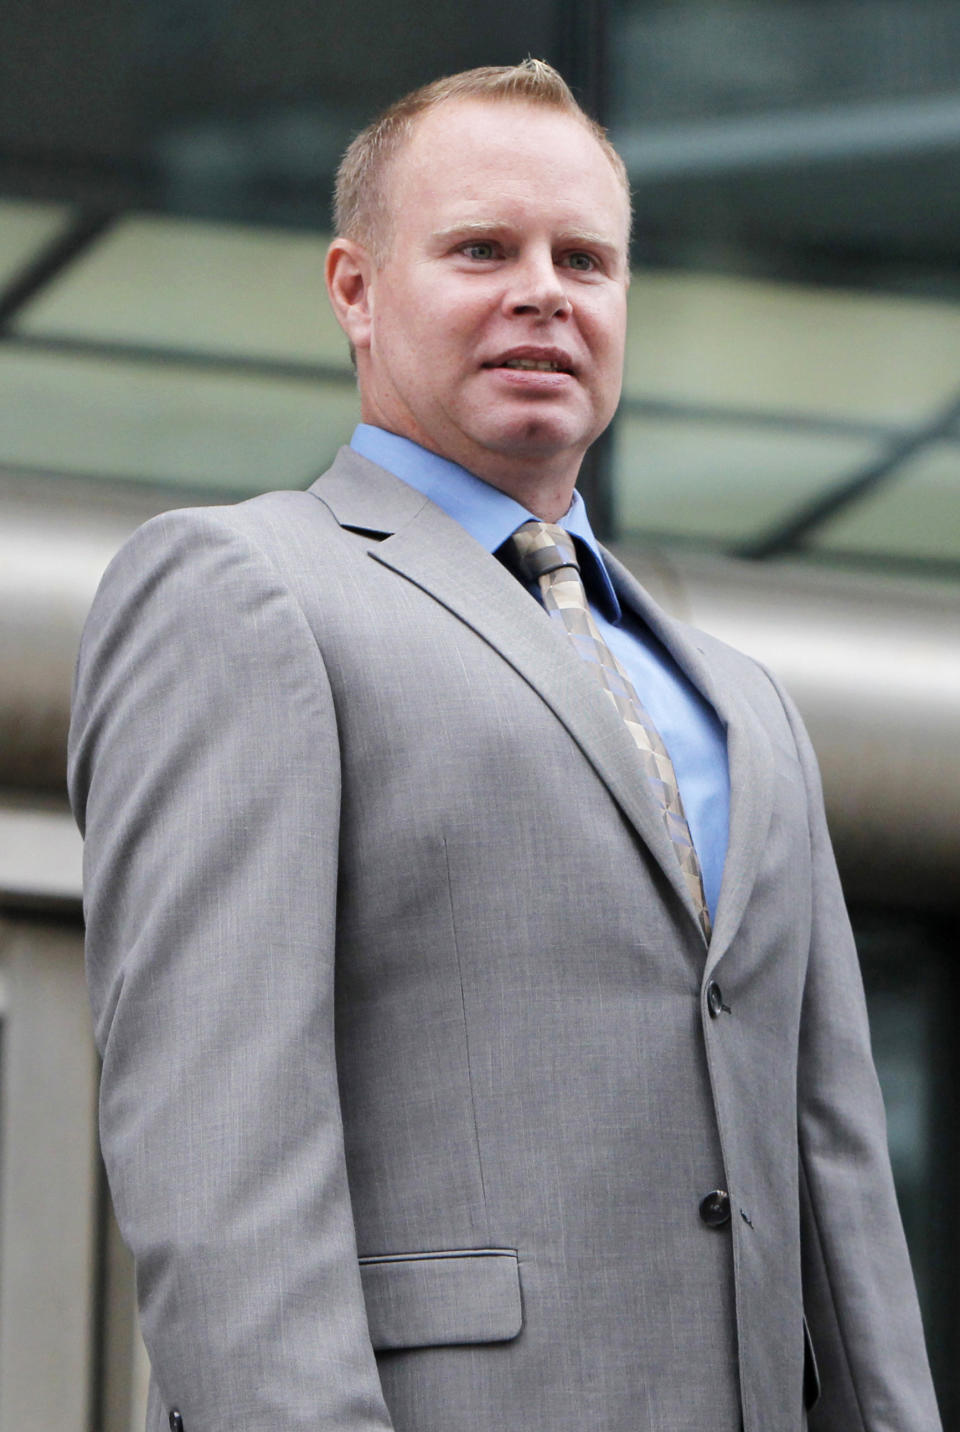 FILE - In this Oct. 19, 2010 file photo, former flight attendant Steven Slater leaves a Queens courthouse in New York. When a JetBlue flight landed at New York's John F. Kennedy International Airport one day in 2010, flight attendant Steven Slater decided he’d had enough. Slater swore at a passenger over the plane's public address system, grabbed a beer, pulled the emergency chute and slid down onto the tarmac. (AP Photo/Seth Wenig, File)